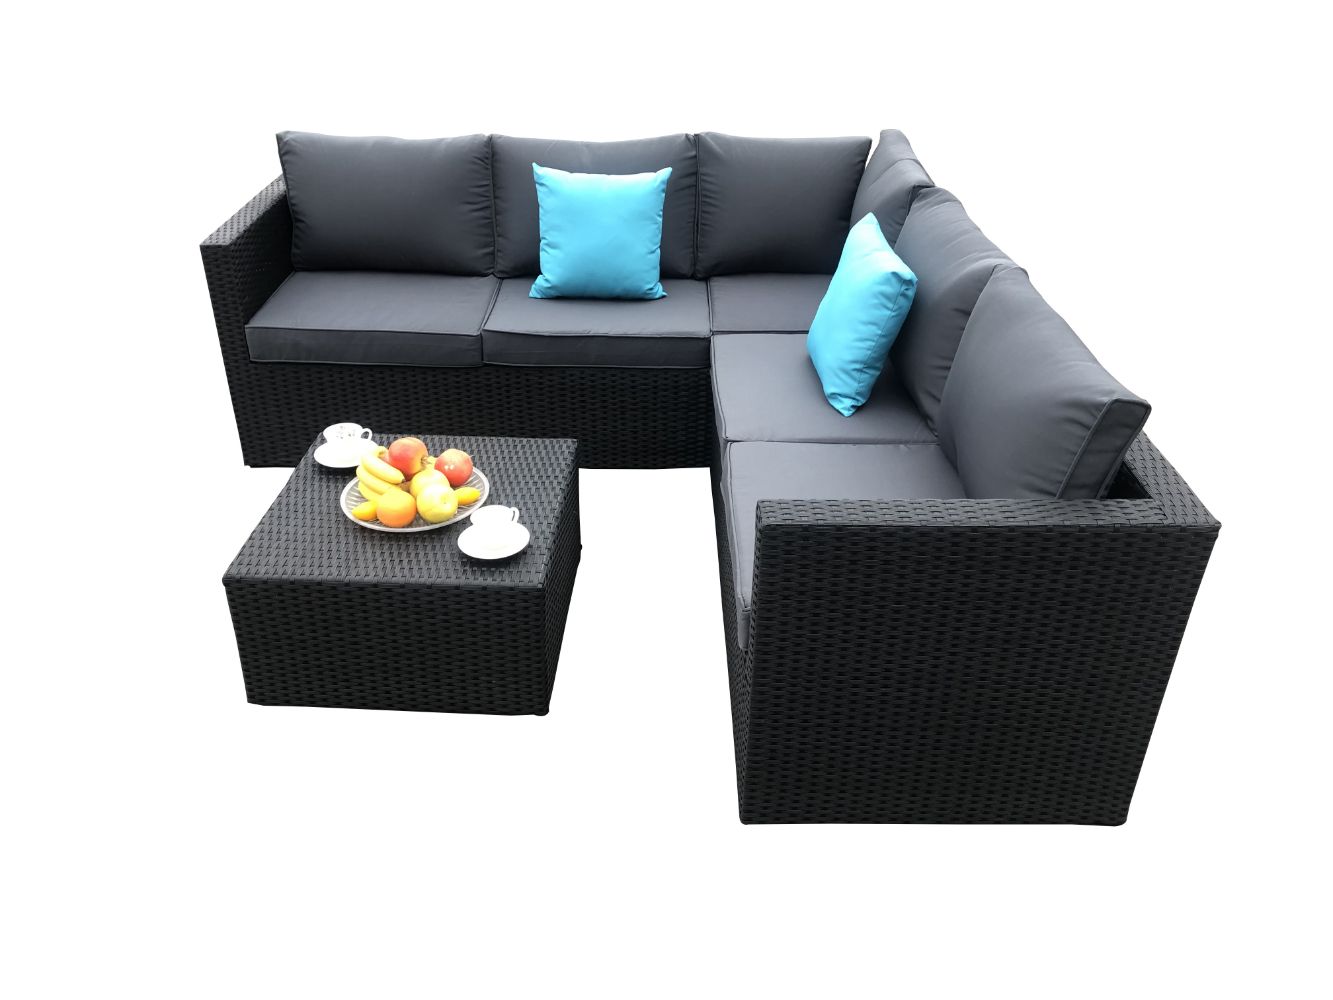 "The Chelsea Garden Company" Rattan Garden Furniture Clearance: Dining Sets, Sofas, Loungers and Cooler Tables